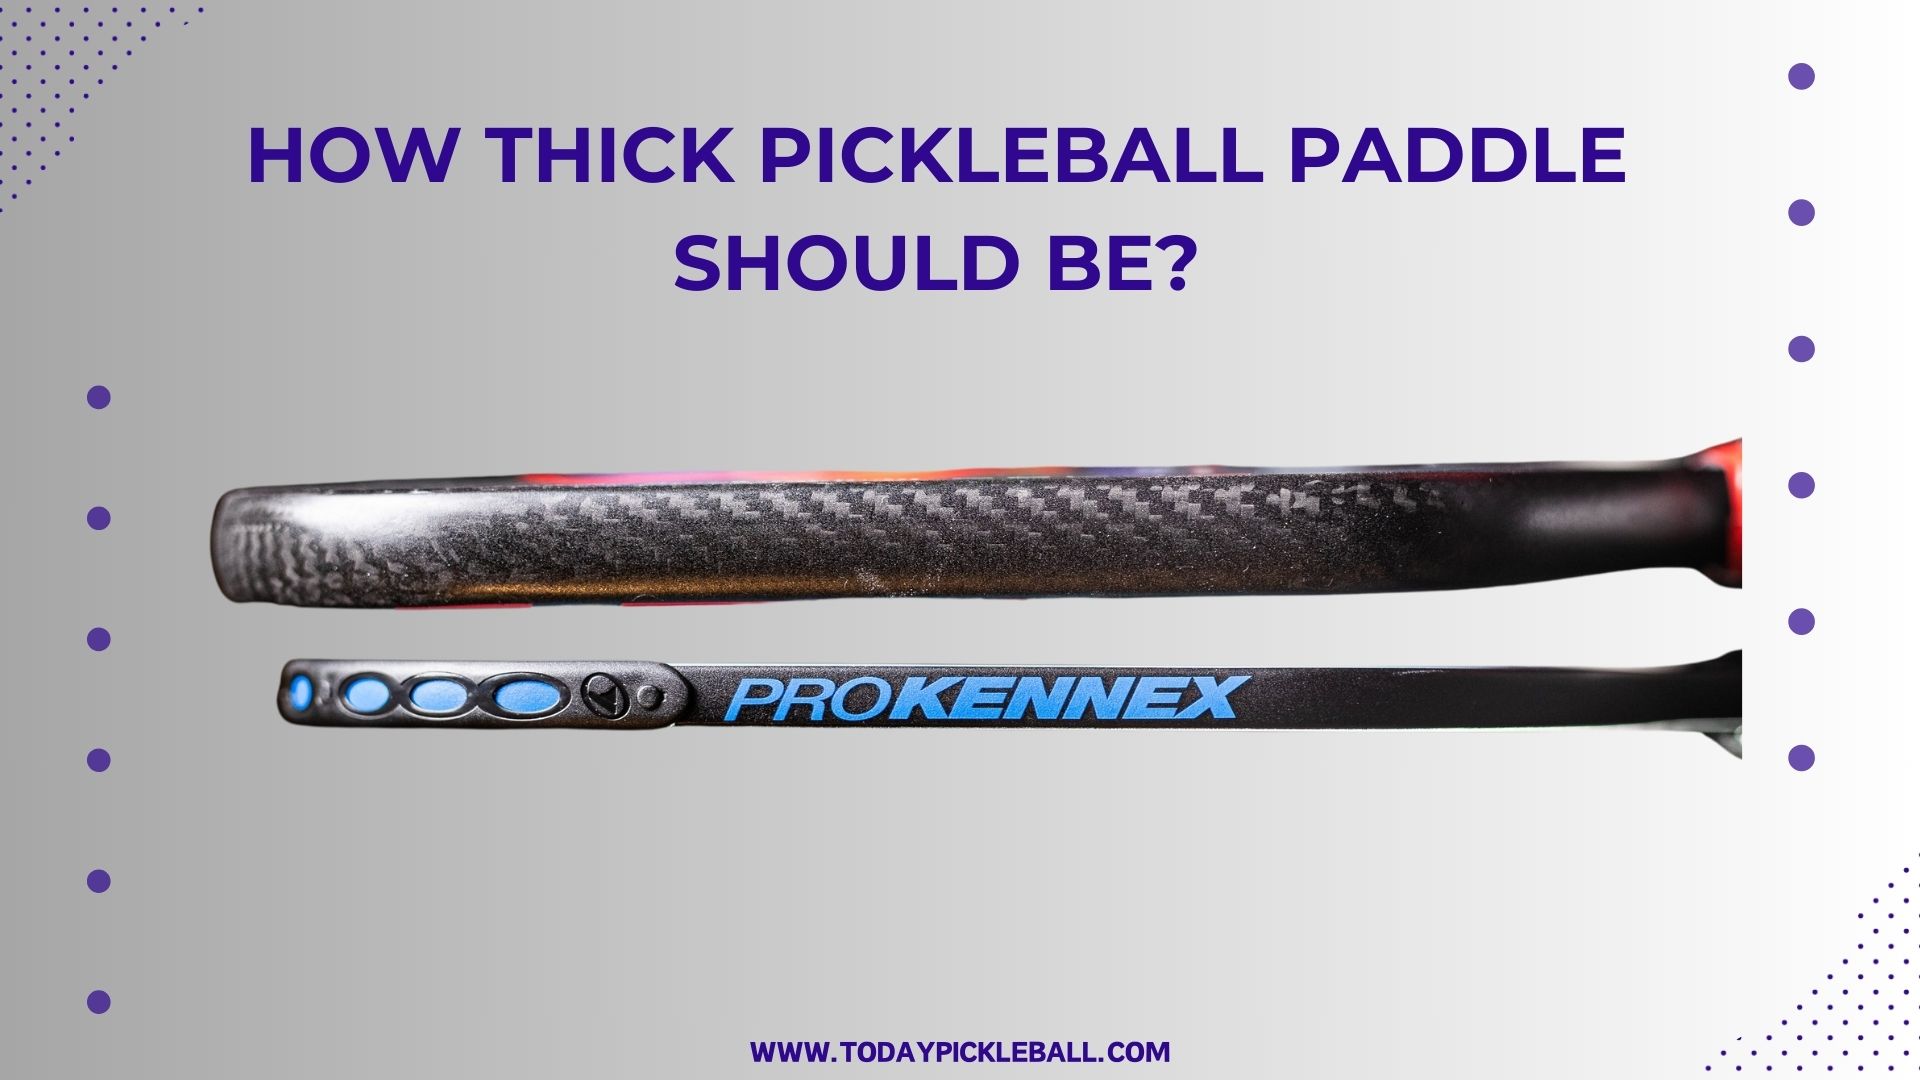 How Thick Pickleball Paddle Should Be?